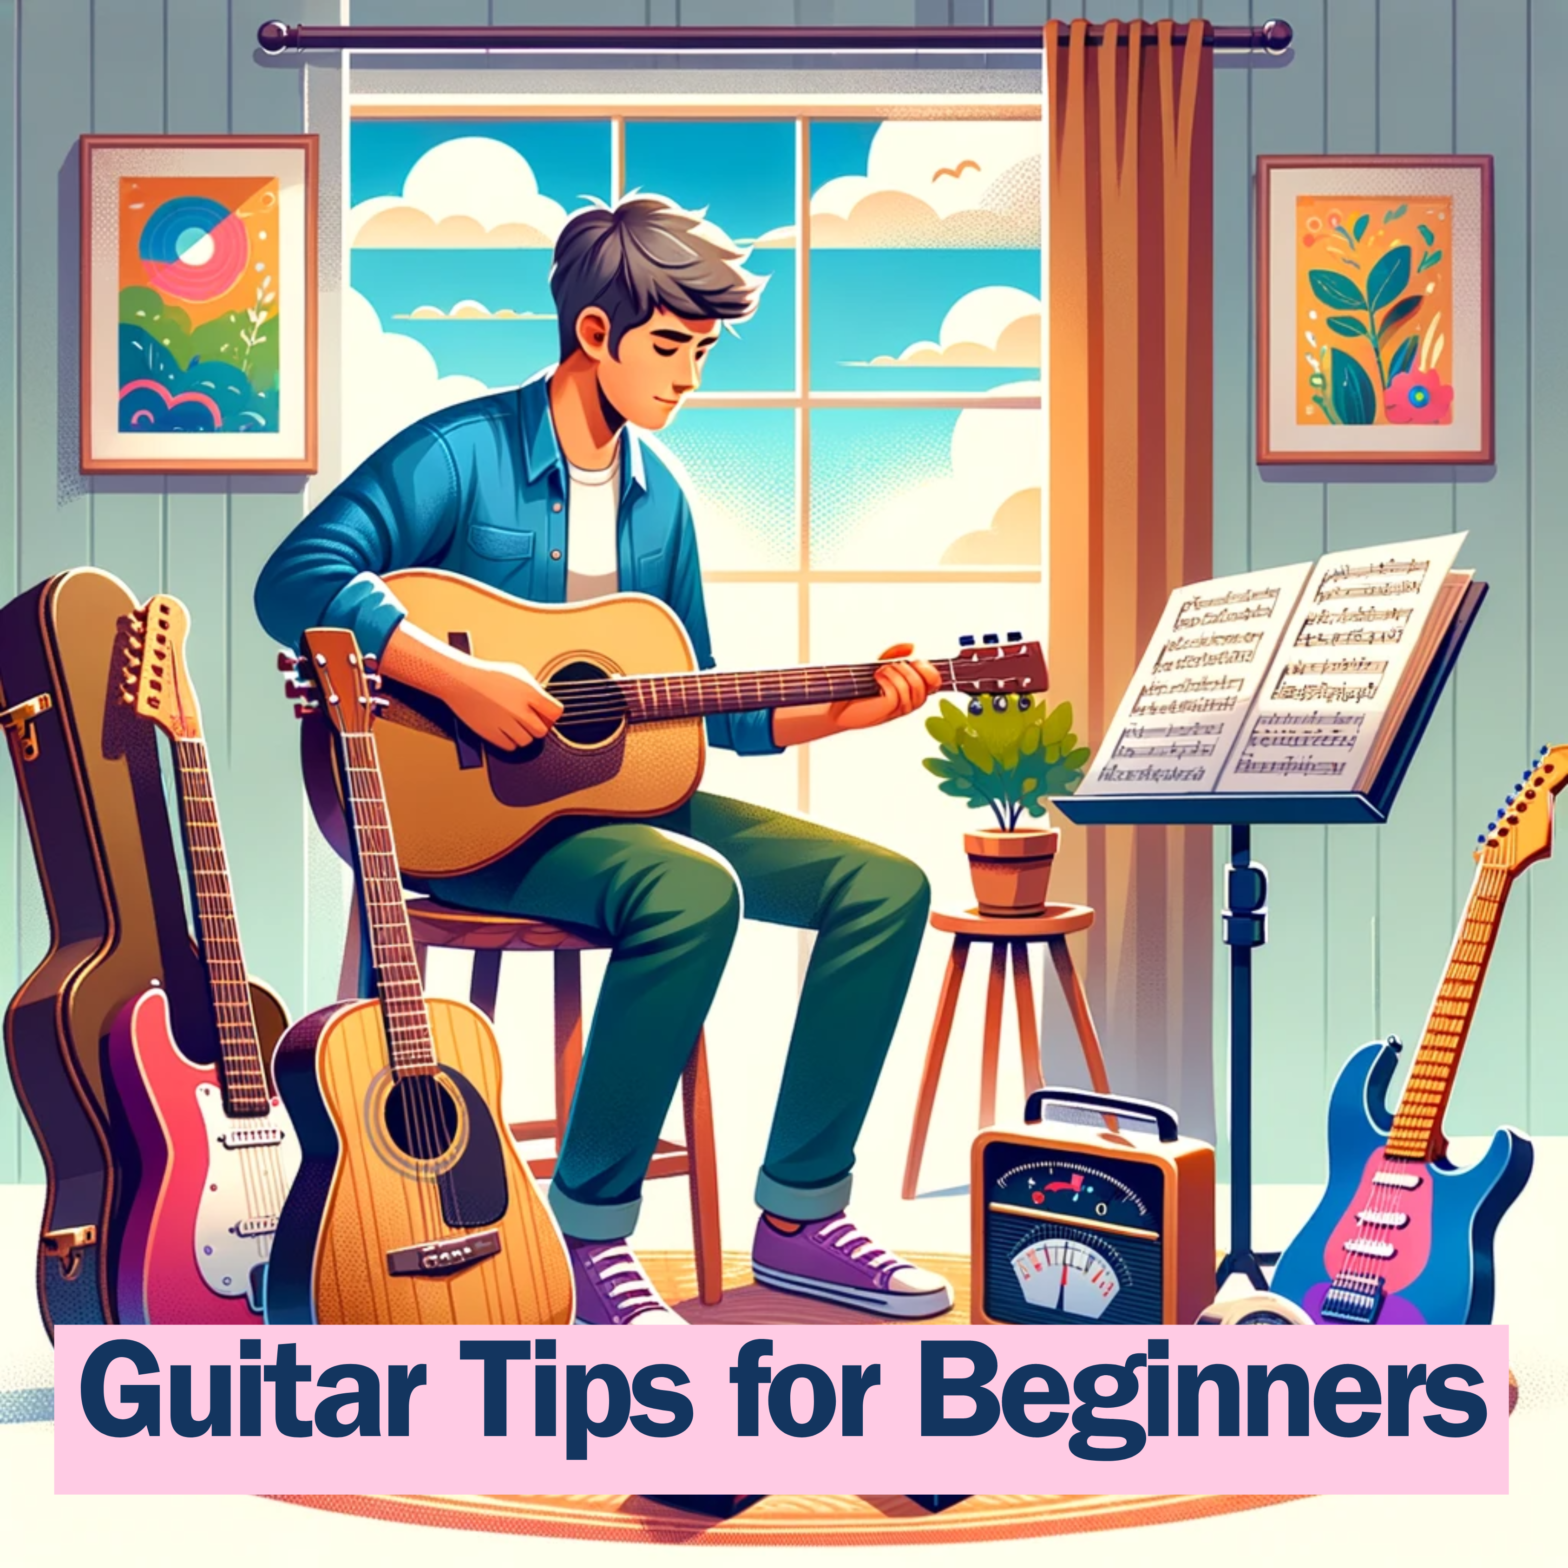 image that visually represents the article about "Guitar Tips for Beginners," featuring various elements related to the topic.